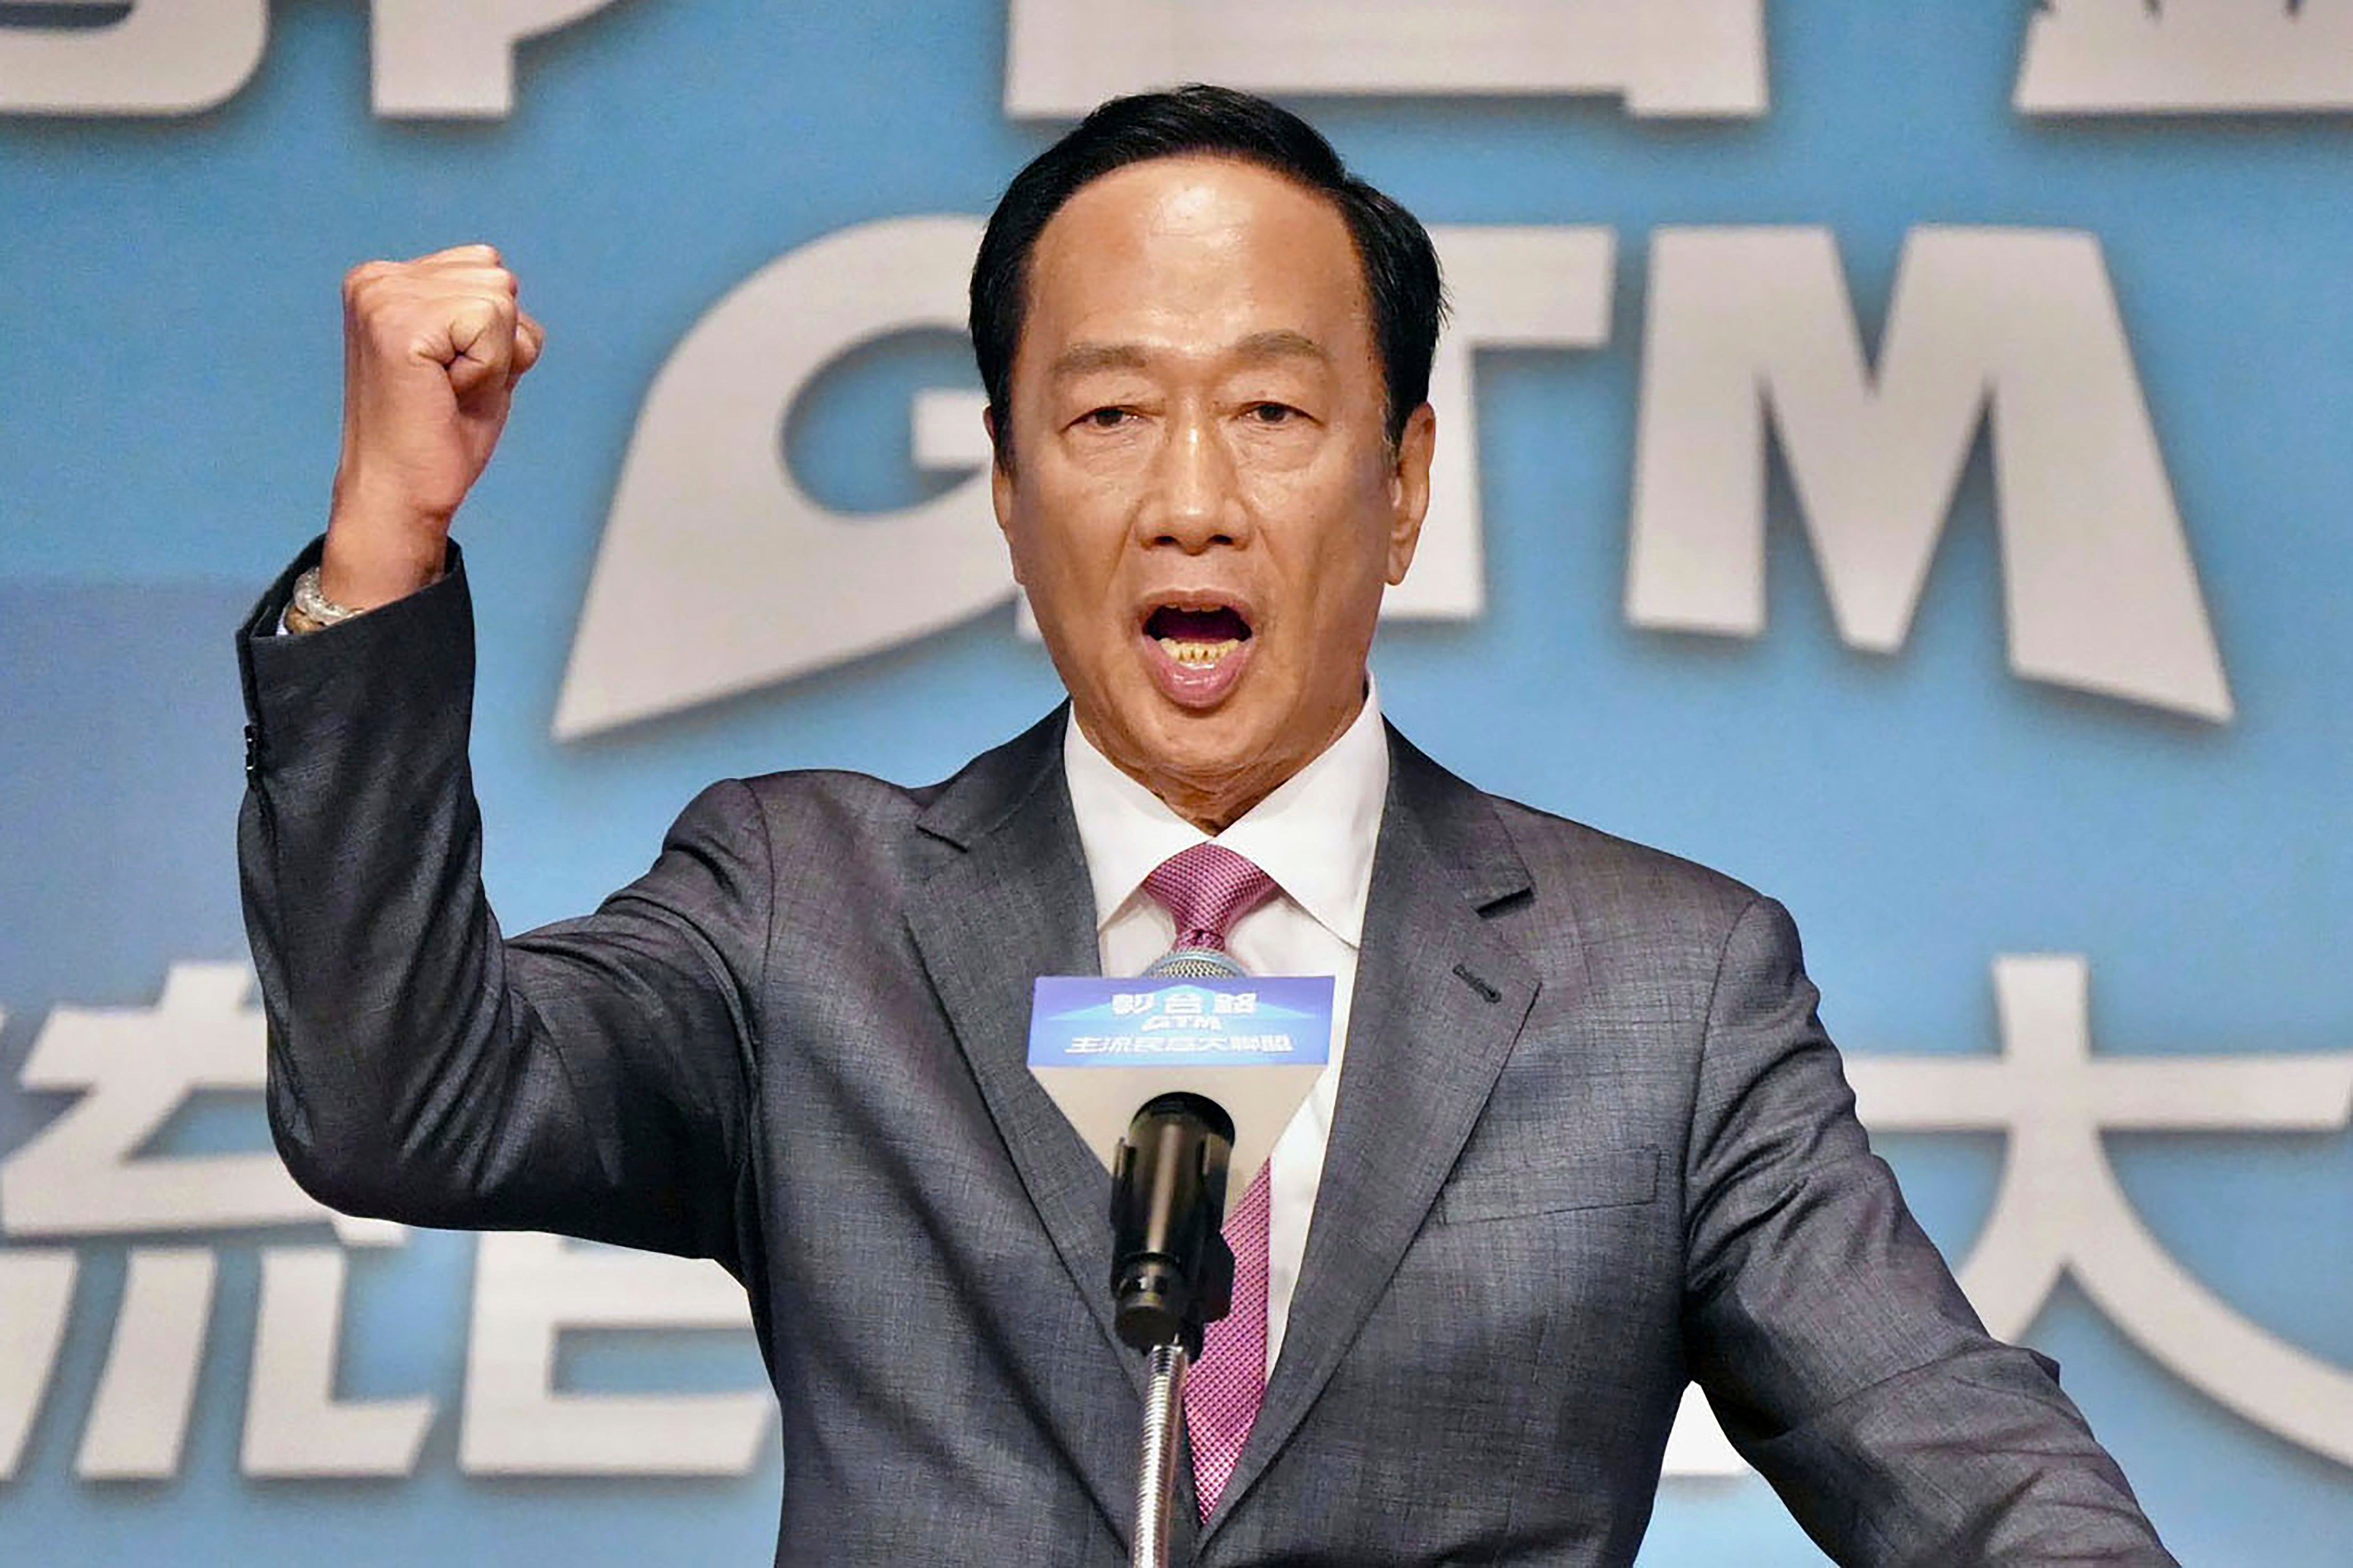 Terry Gou, the billionaire founder of Foxconn, is running to be Taiwan’s next president